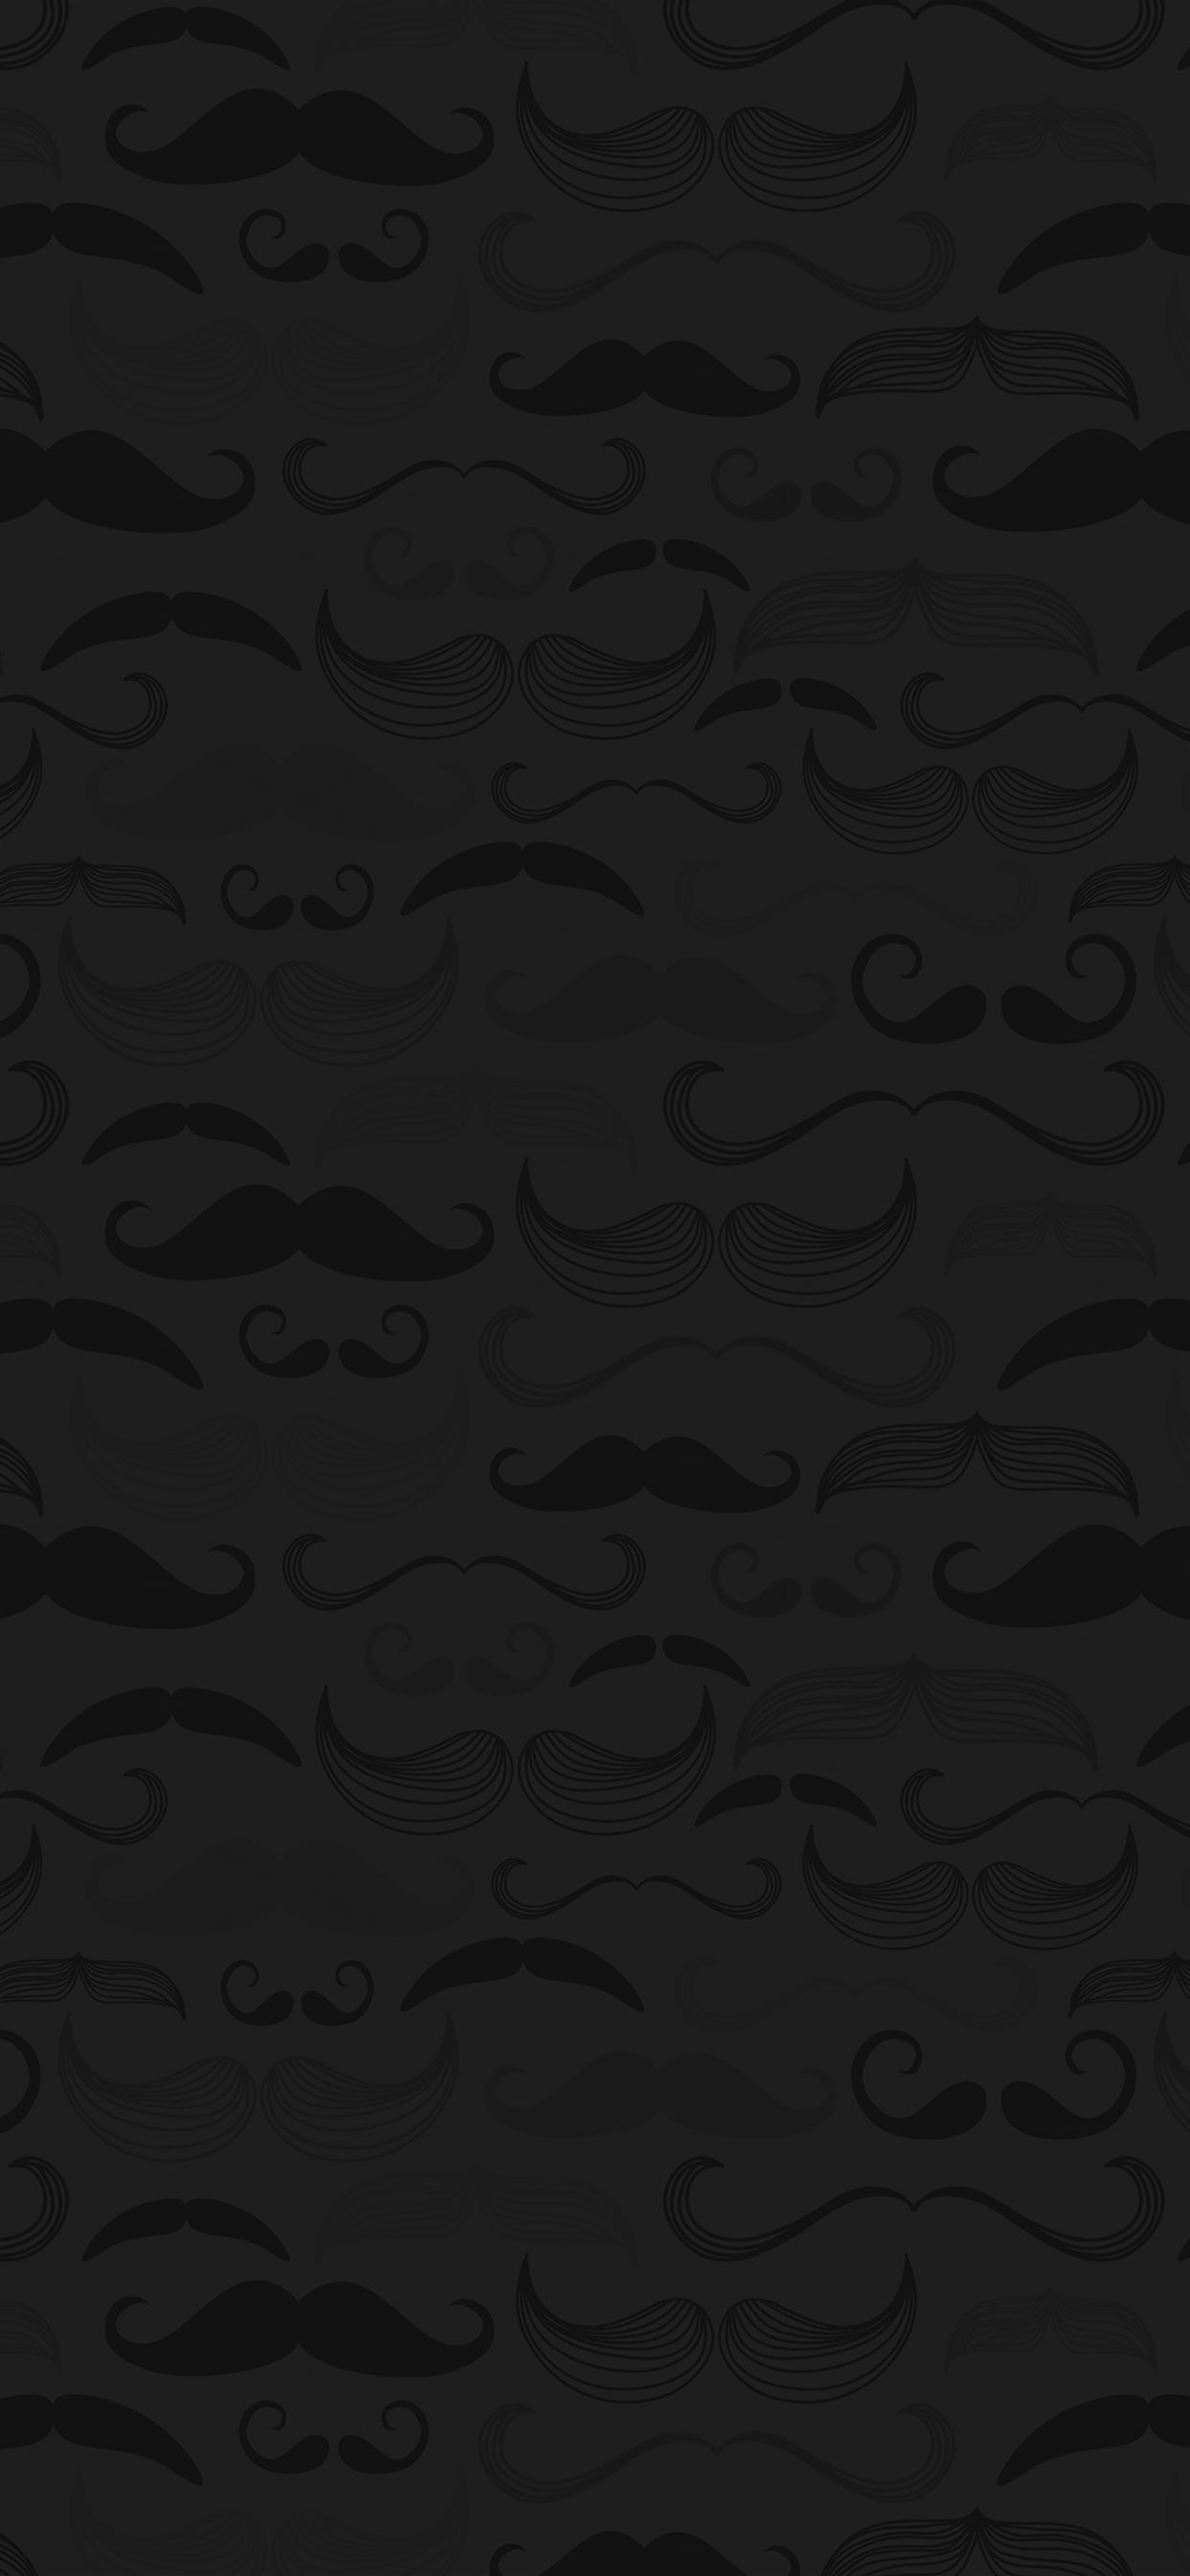 Hipster moustache cute patterns iPhone X Wallpapers Free Download